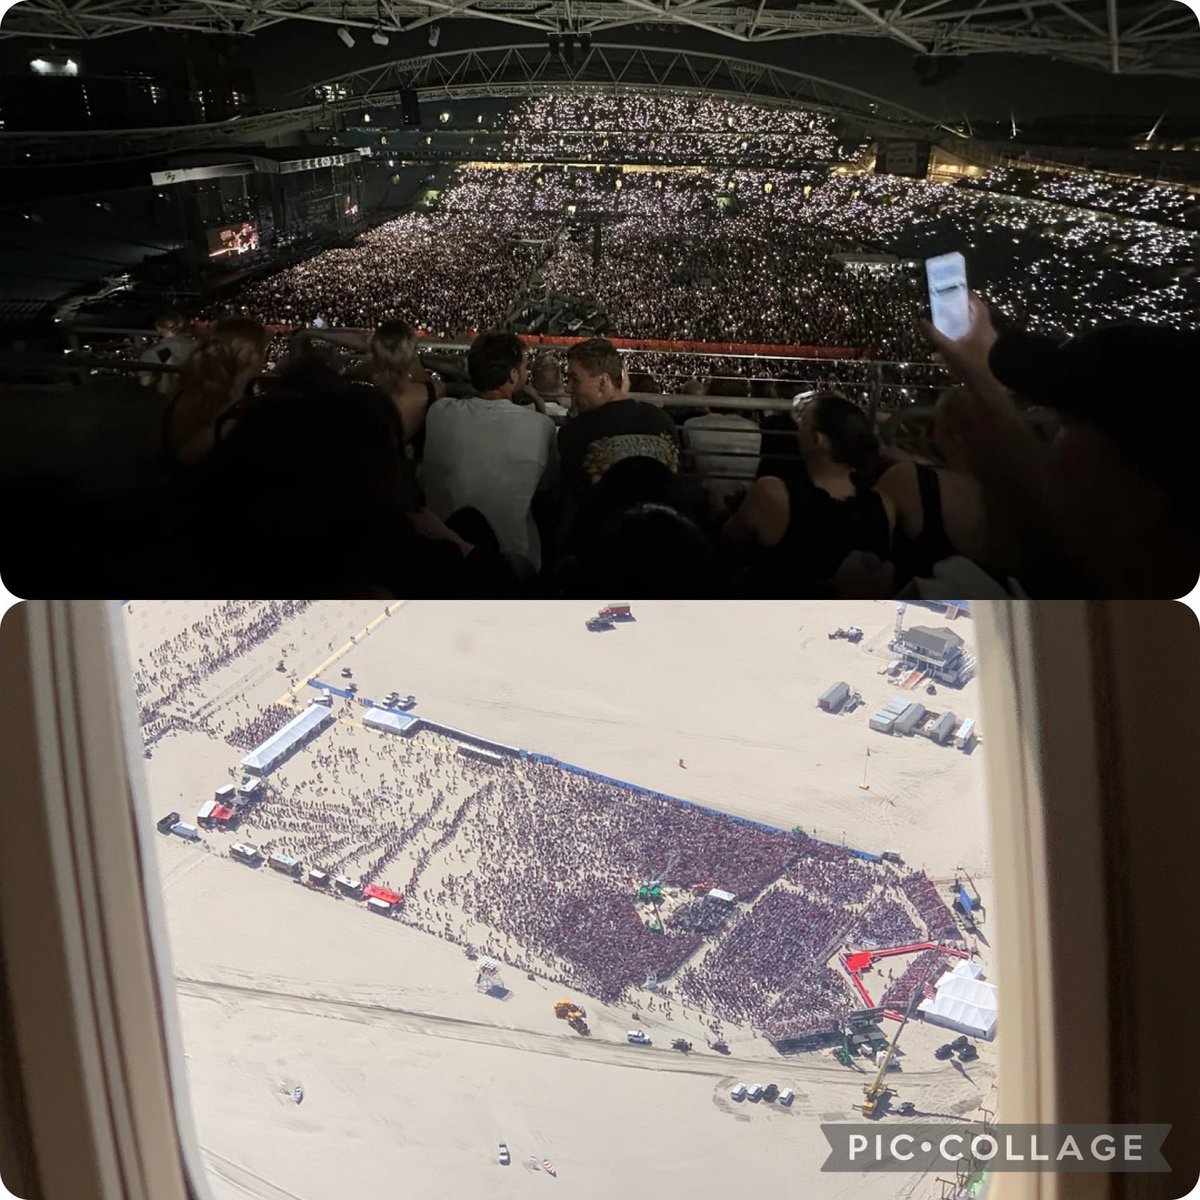 @DefiyantlyFree It’s not a melt down. The rally had maybe 5,000 people. So let’s look at what a 100,000 people actually look like Two comparisons 100,000 people at an Obama speech. 96,000 people at a Taylor Swift concert in the largest Olympic stadium in the world. You see the size